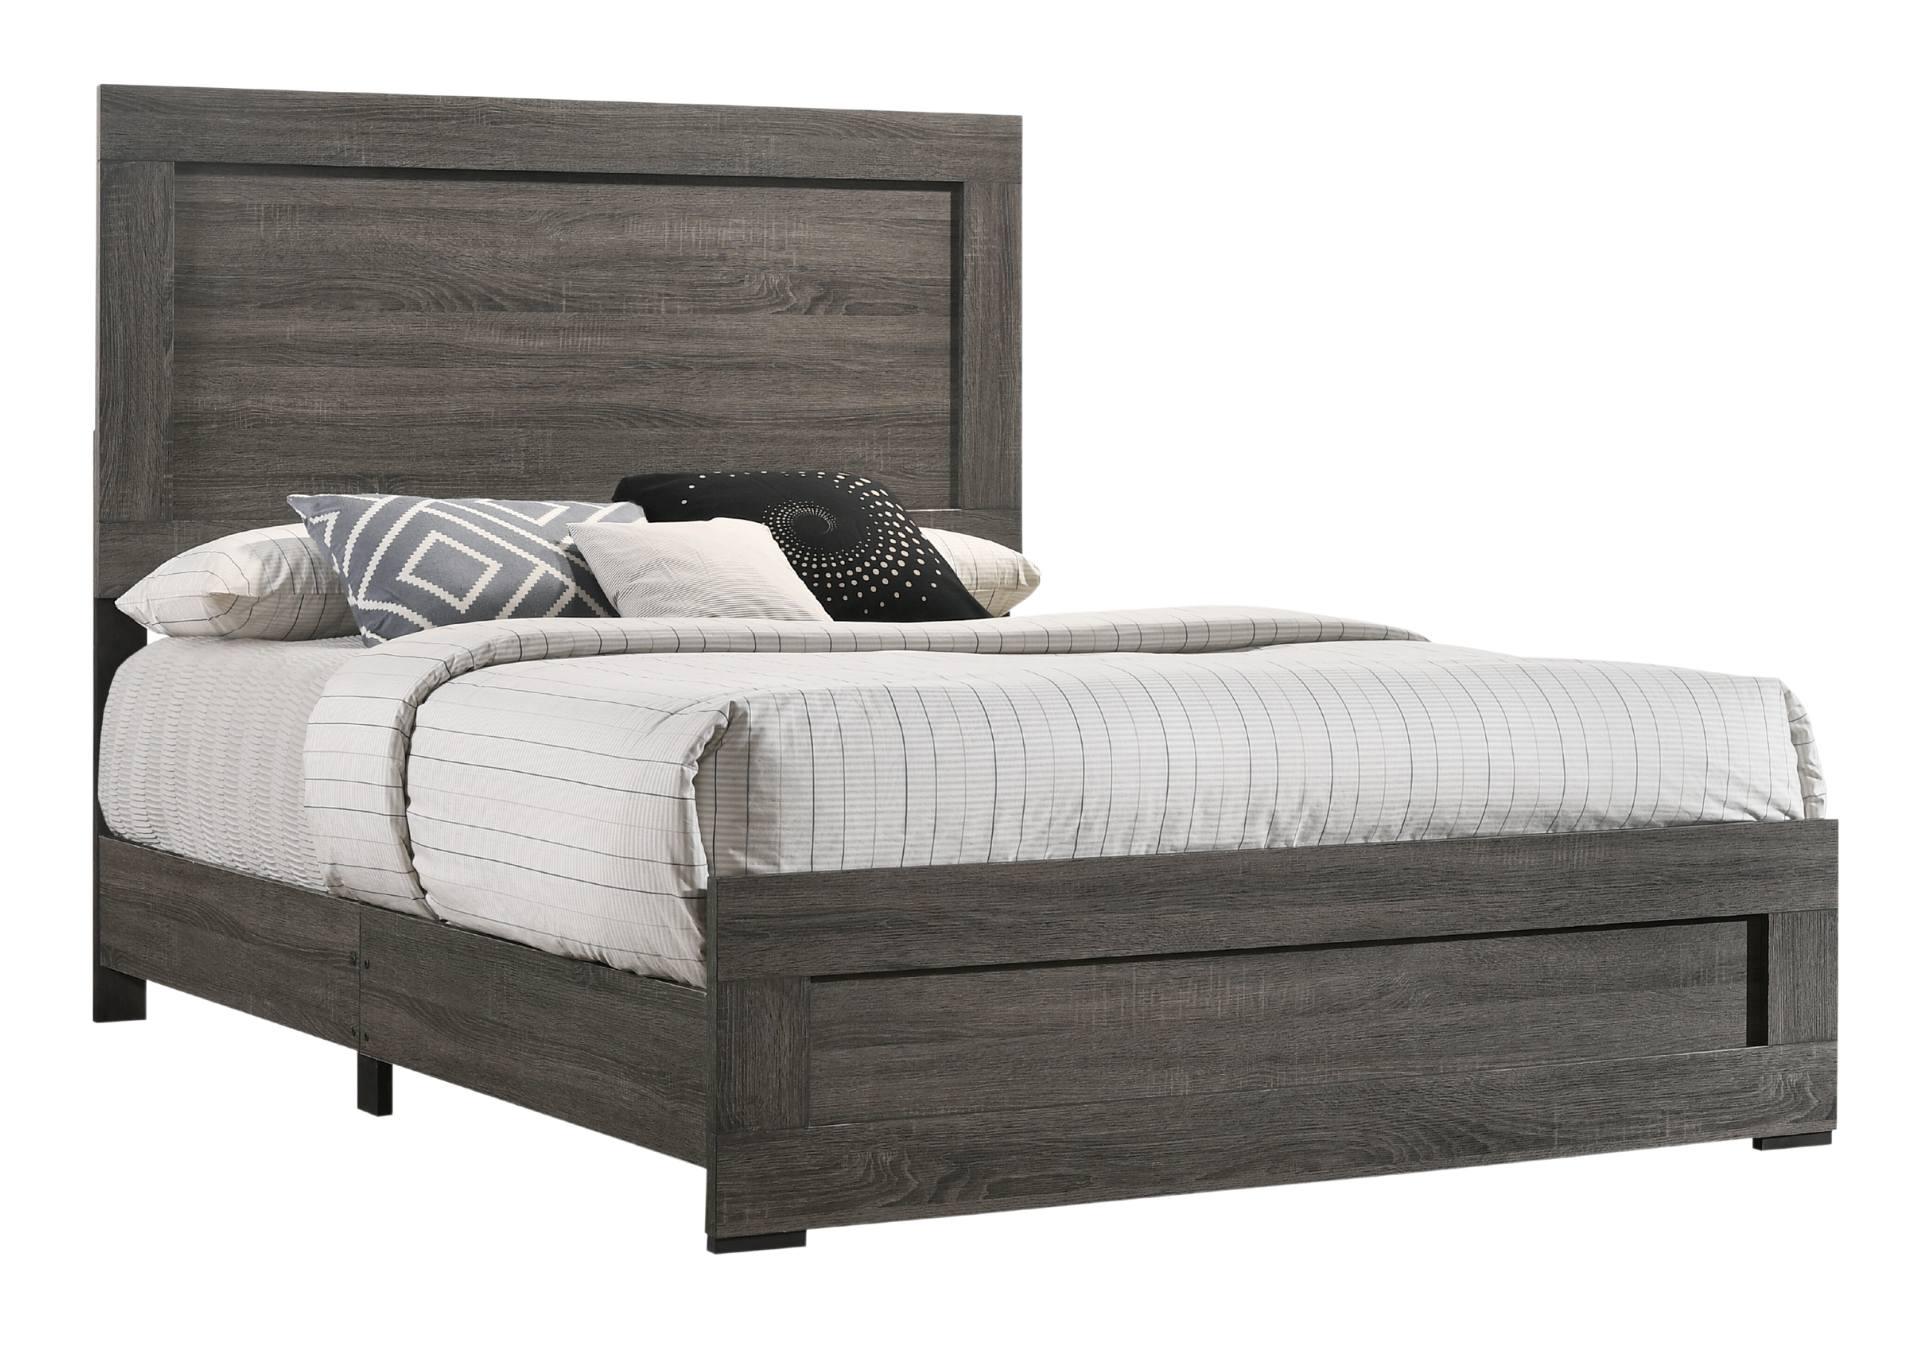 AMELIE GREY FULL BED,LIFESTYLE FURNITURE